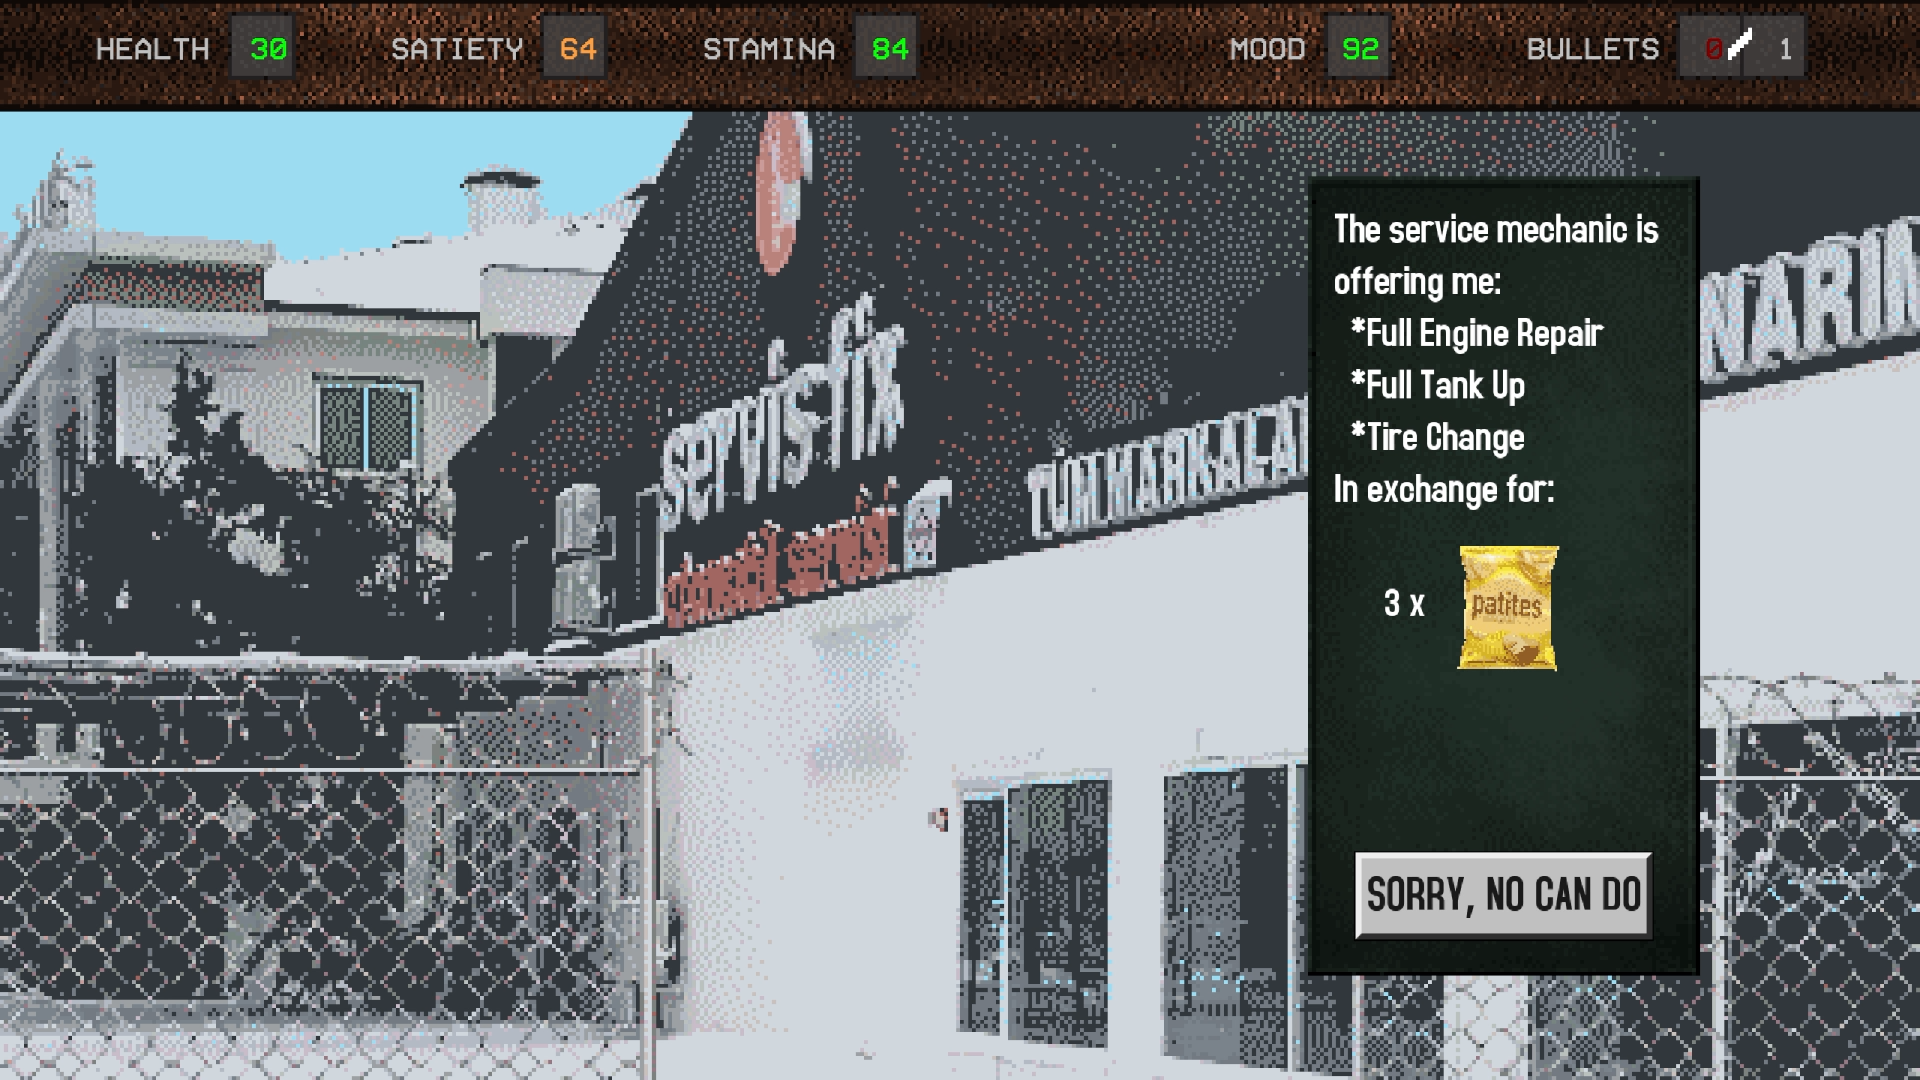 gameplay screenshot - outside of garage offering a trade